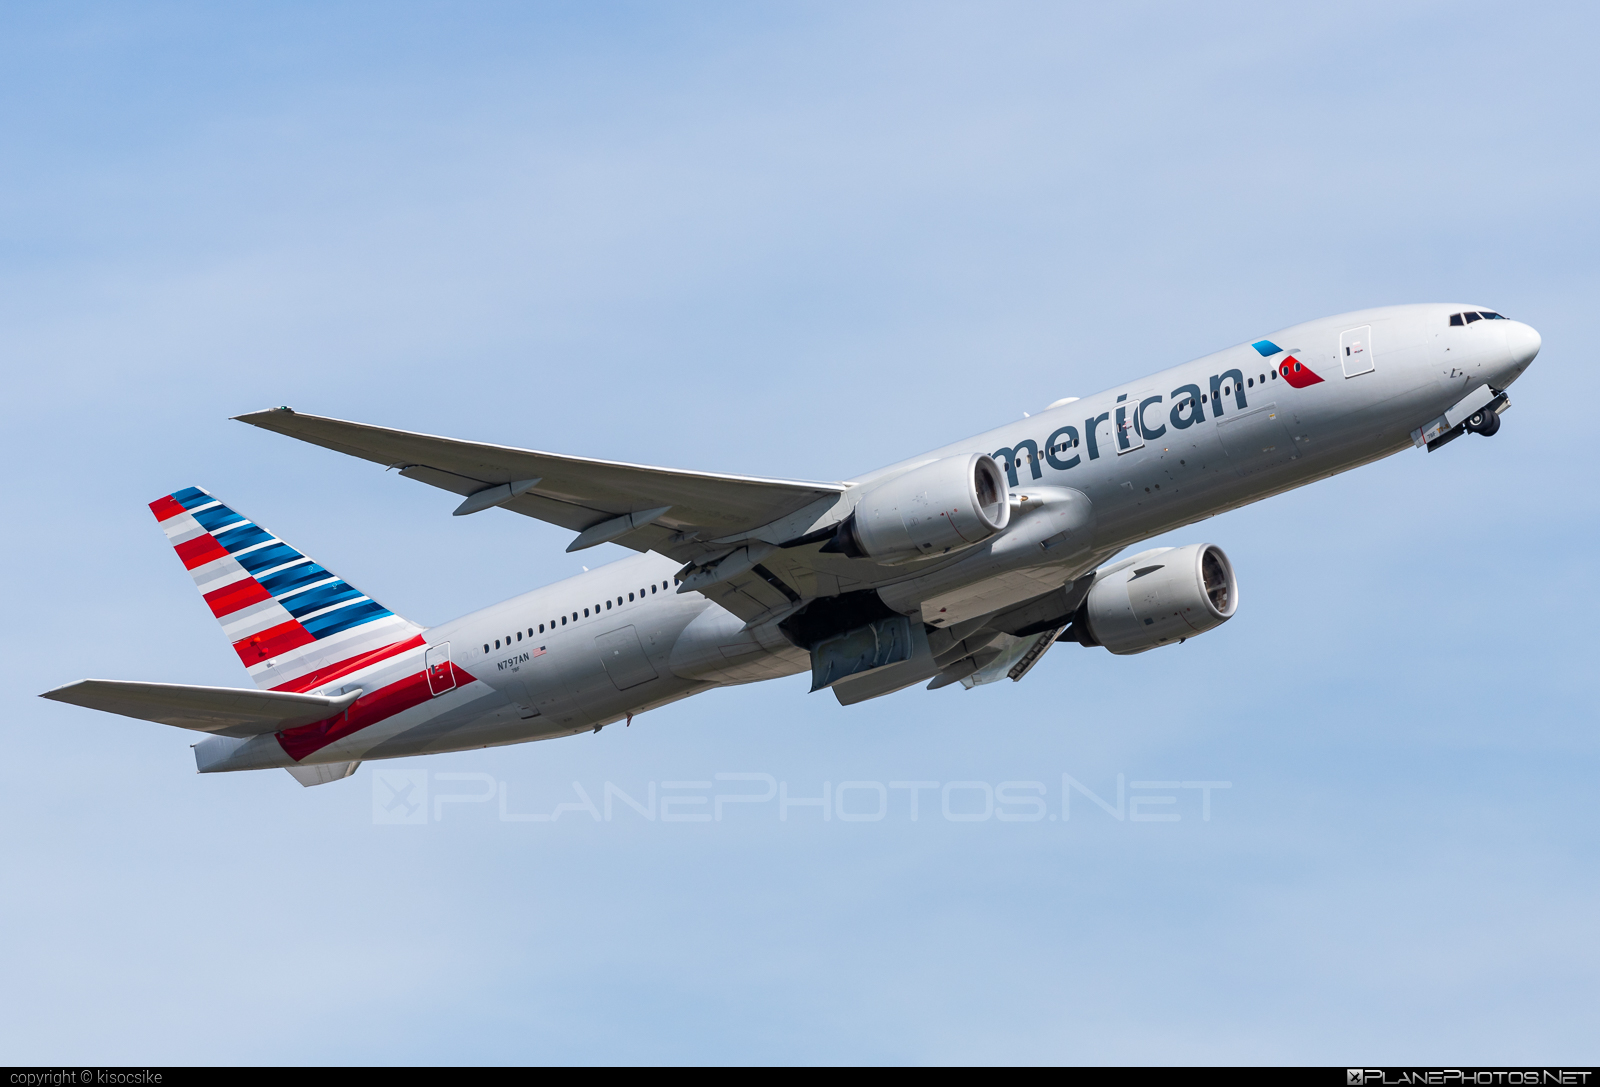 Boeing 767-200ER - N797AN operated by American Airlines #americanairlines #b767 #b767er #boeing #boeing767